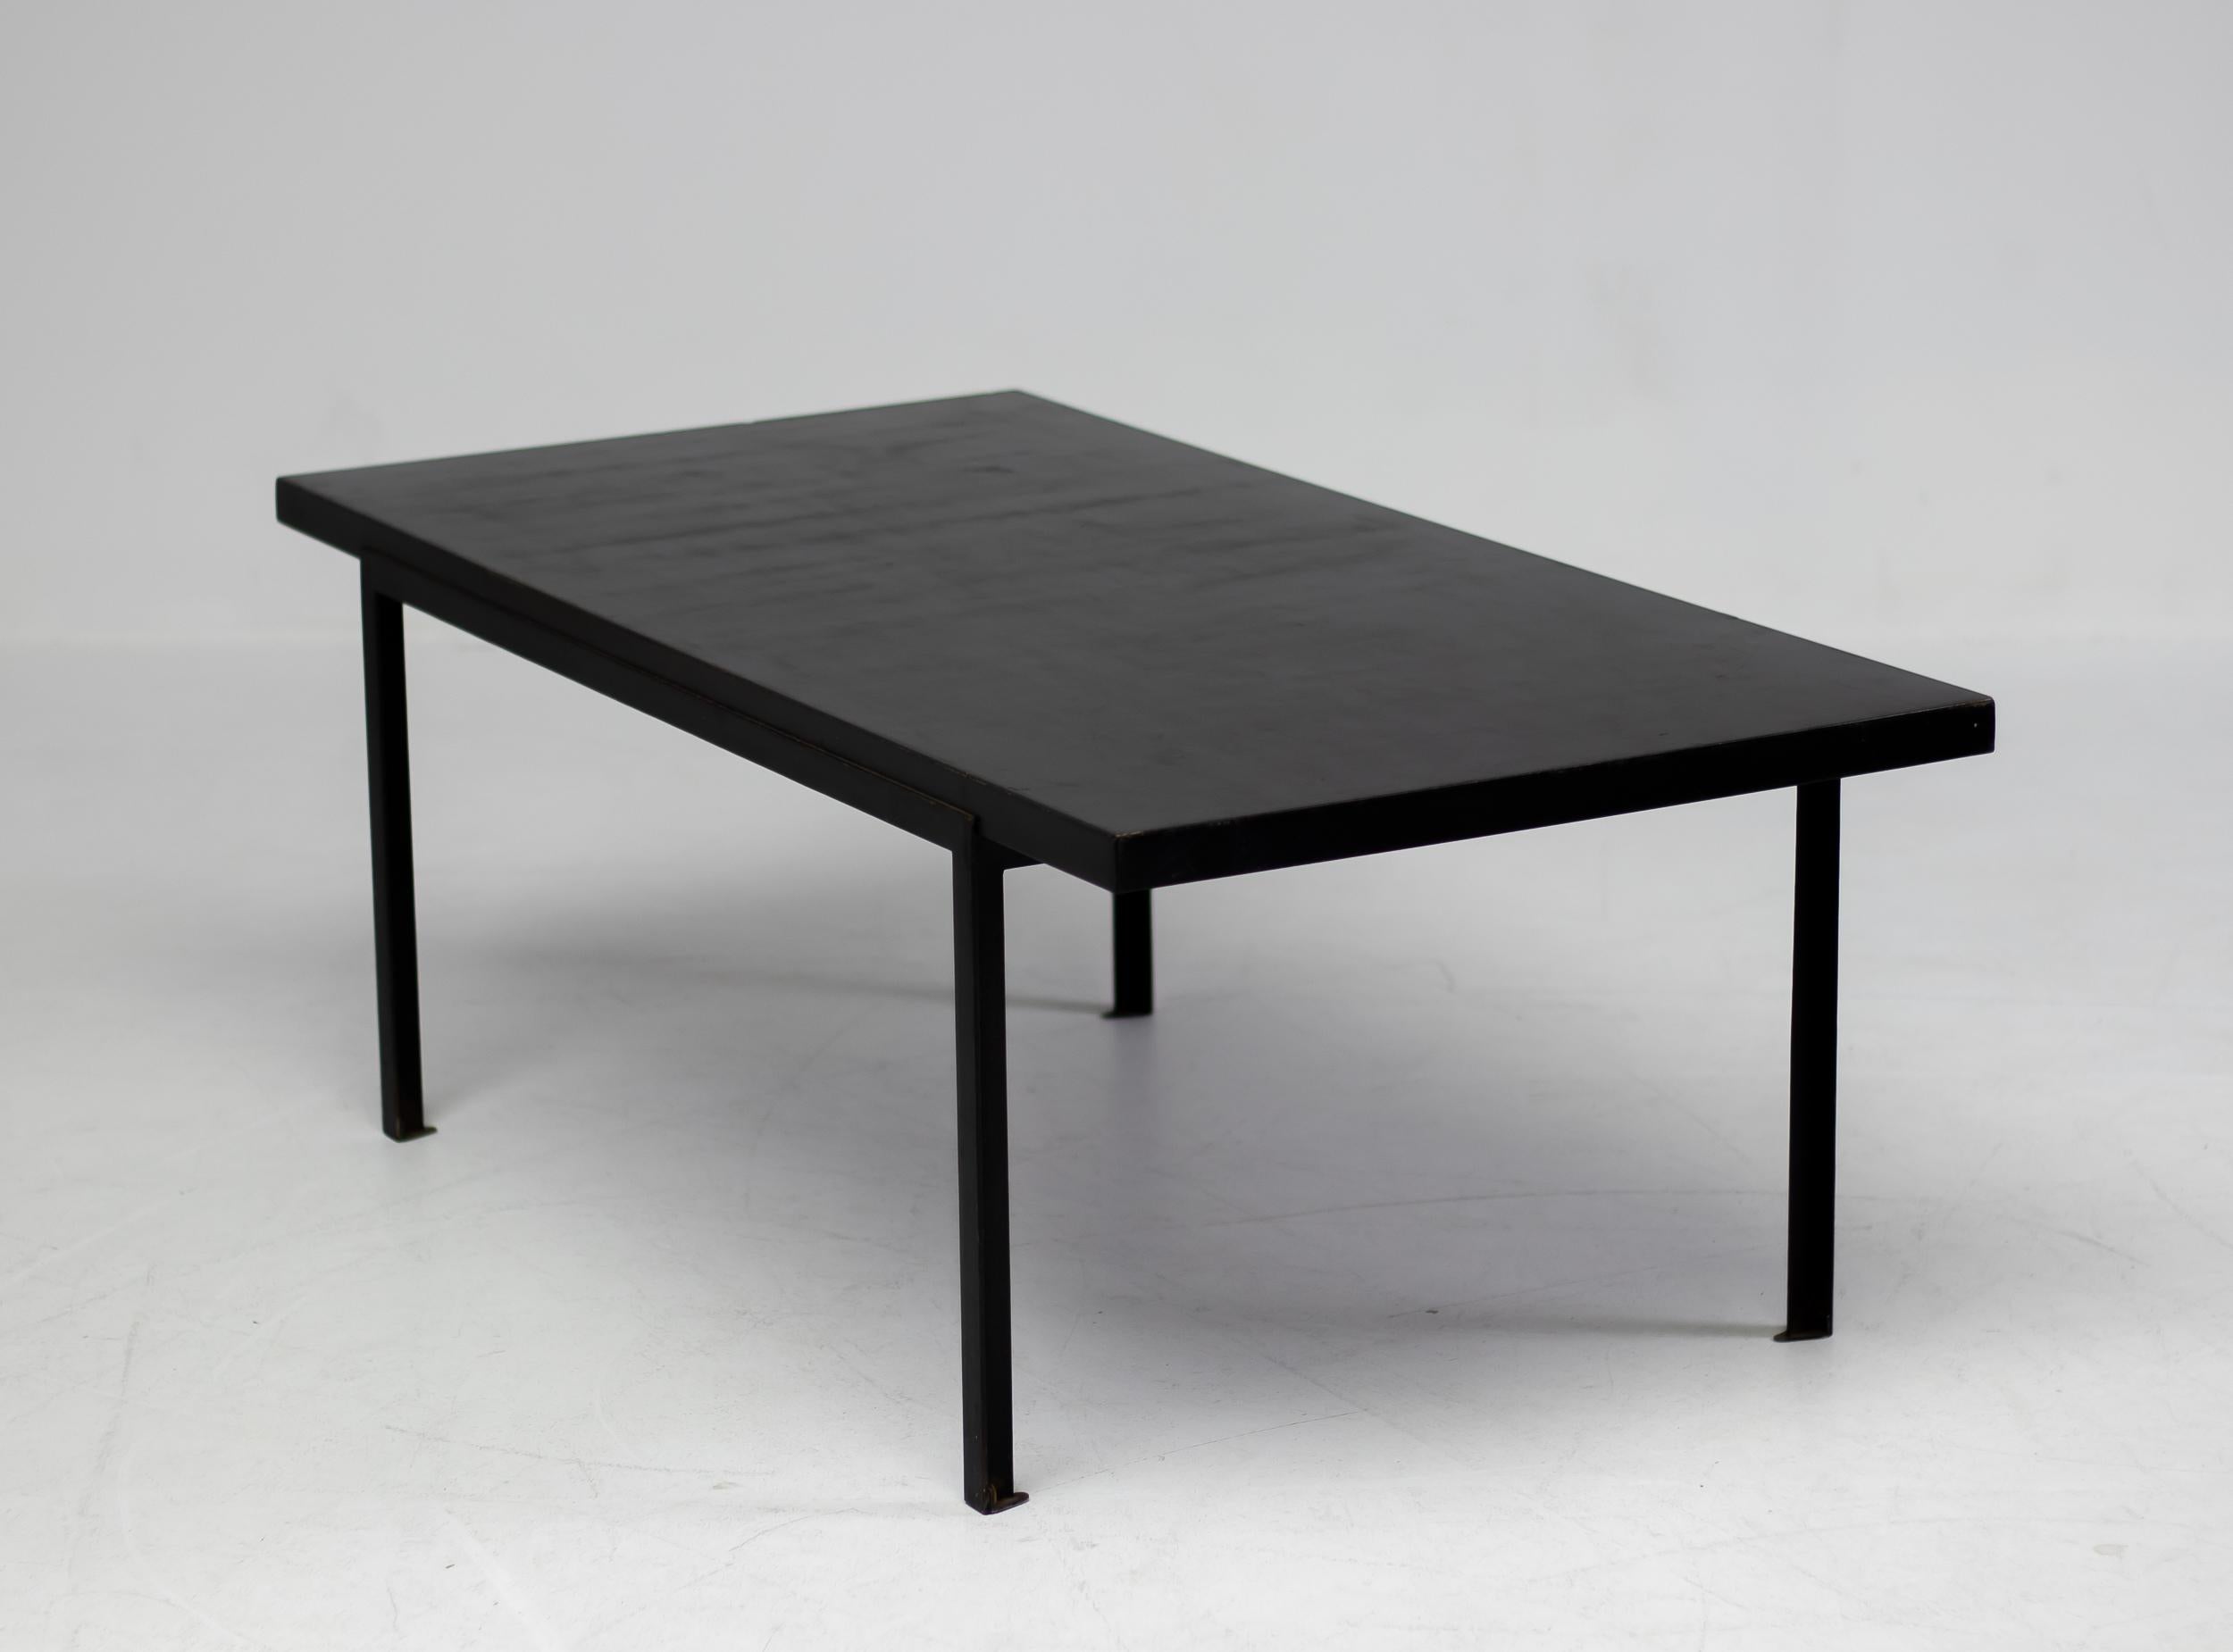 Rare early Florence Knoll for Knoll International coffee table in black enameled steel and black laminate.
Signed with decal manufacturer's label to underside.

Literature: Knoll Furniture: 1938-1960, Rouland and Rouland, pg. 110.

Florence